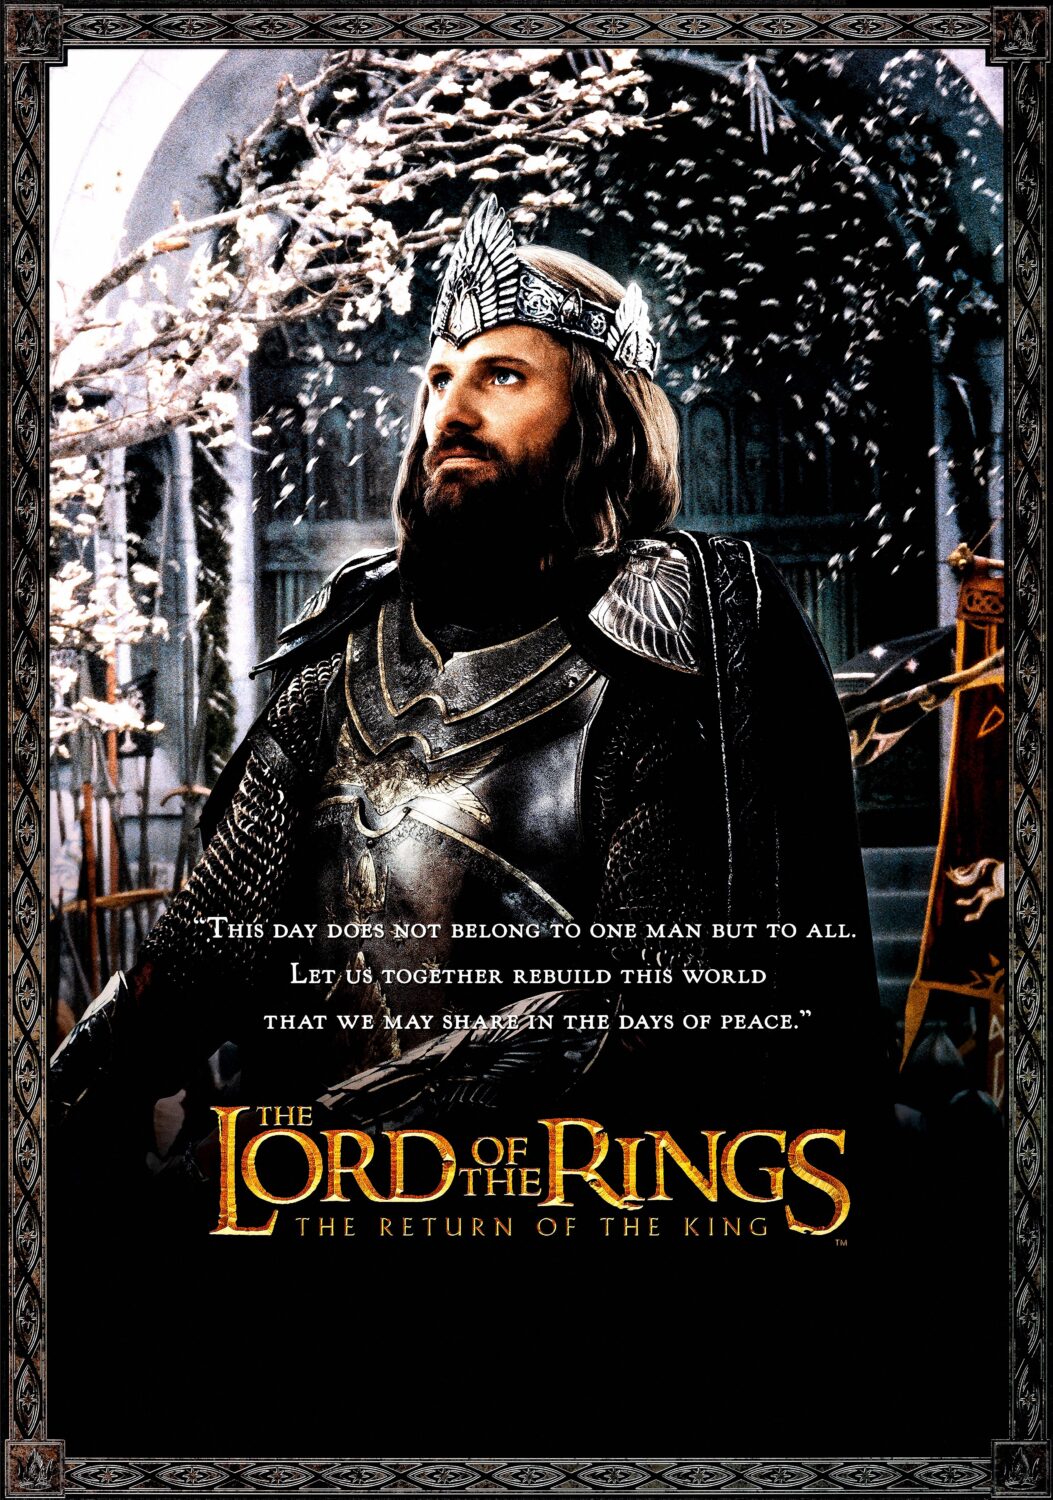 The Lord of the Rings- The Return of the King - Aragorn Movie Poster